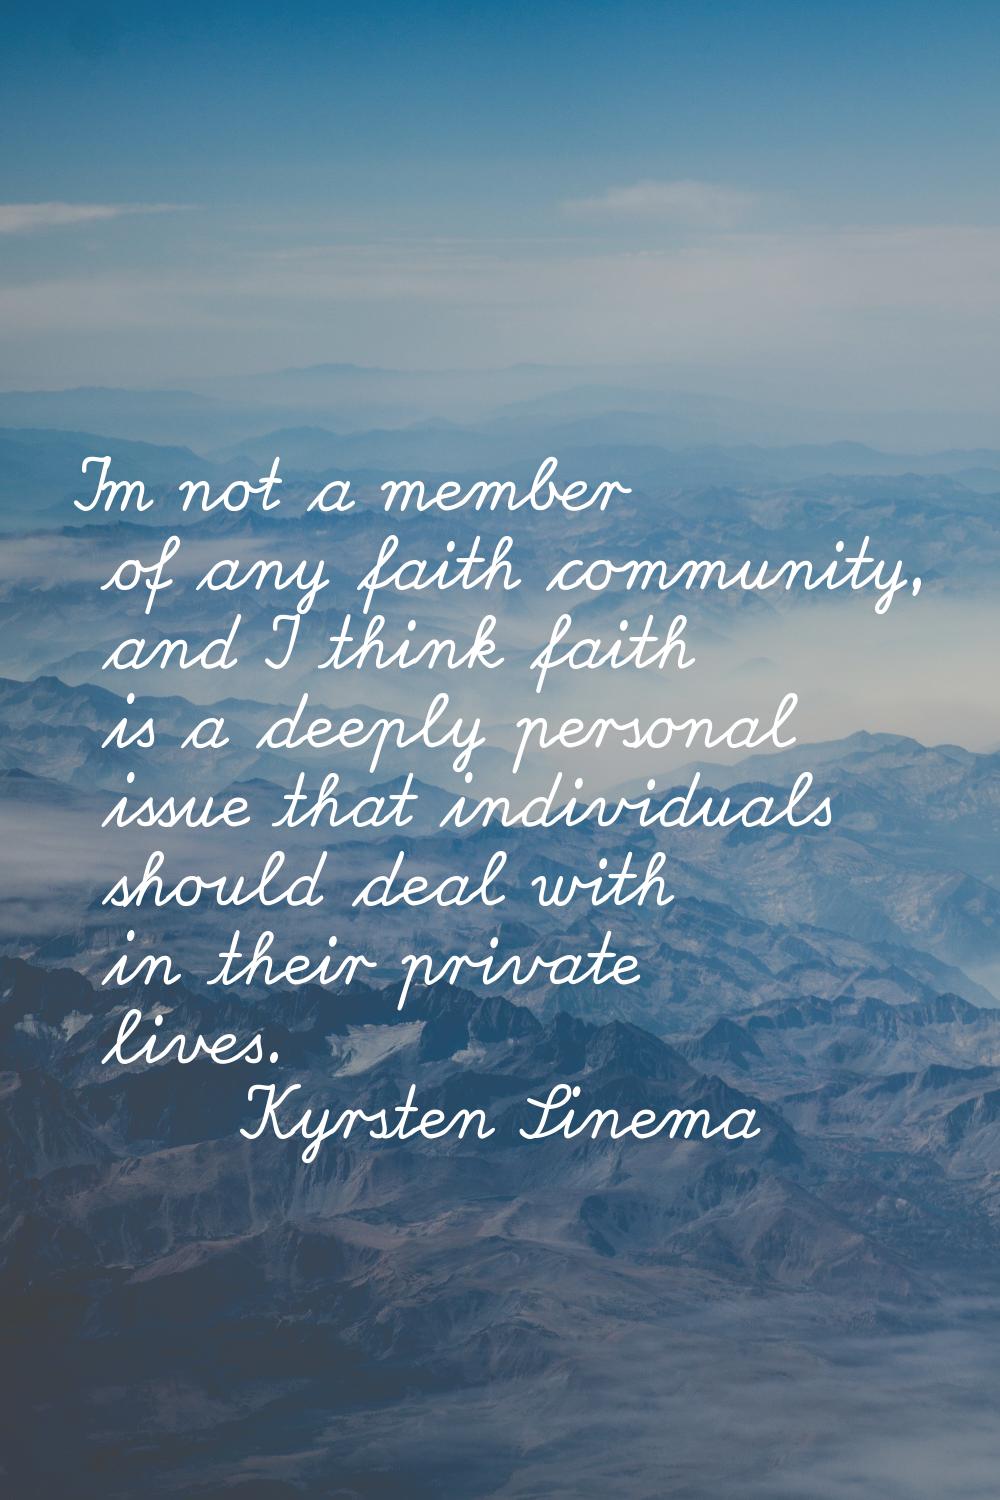 I'm not a member of any faith community, and I think faith is a deeply personal issue that individu